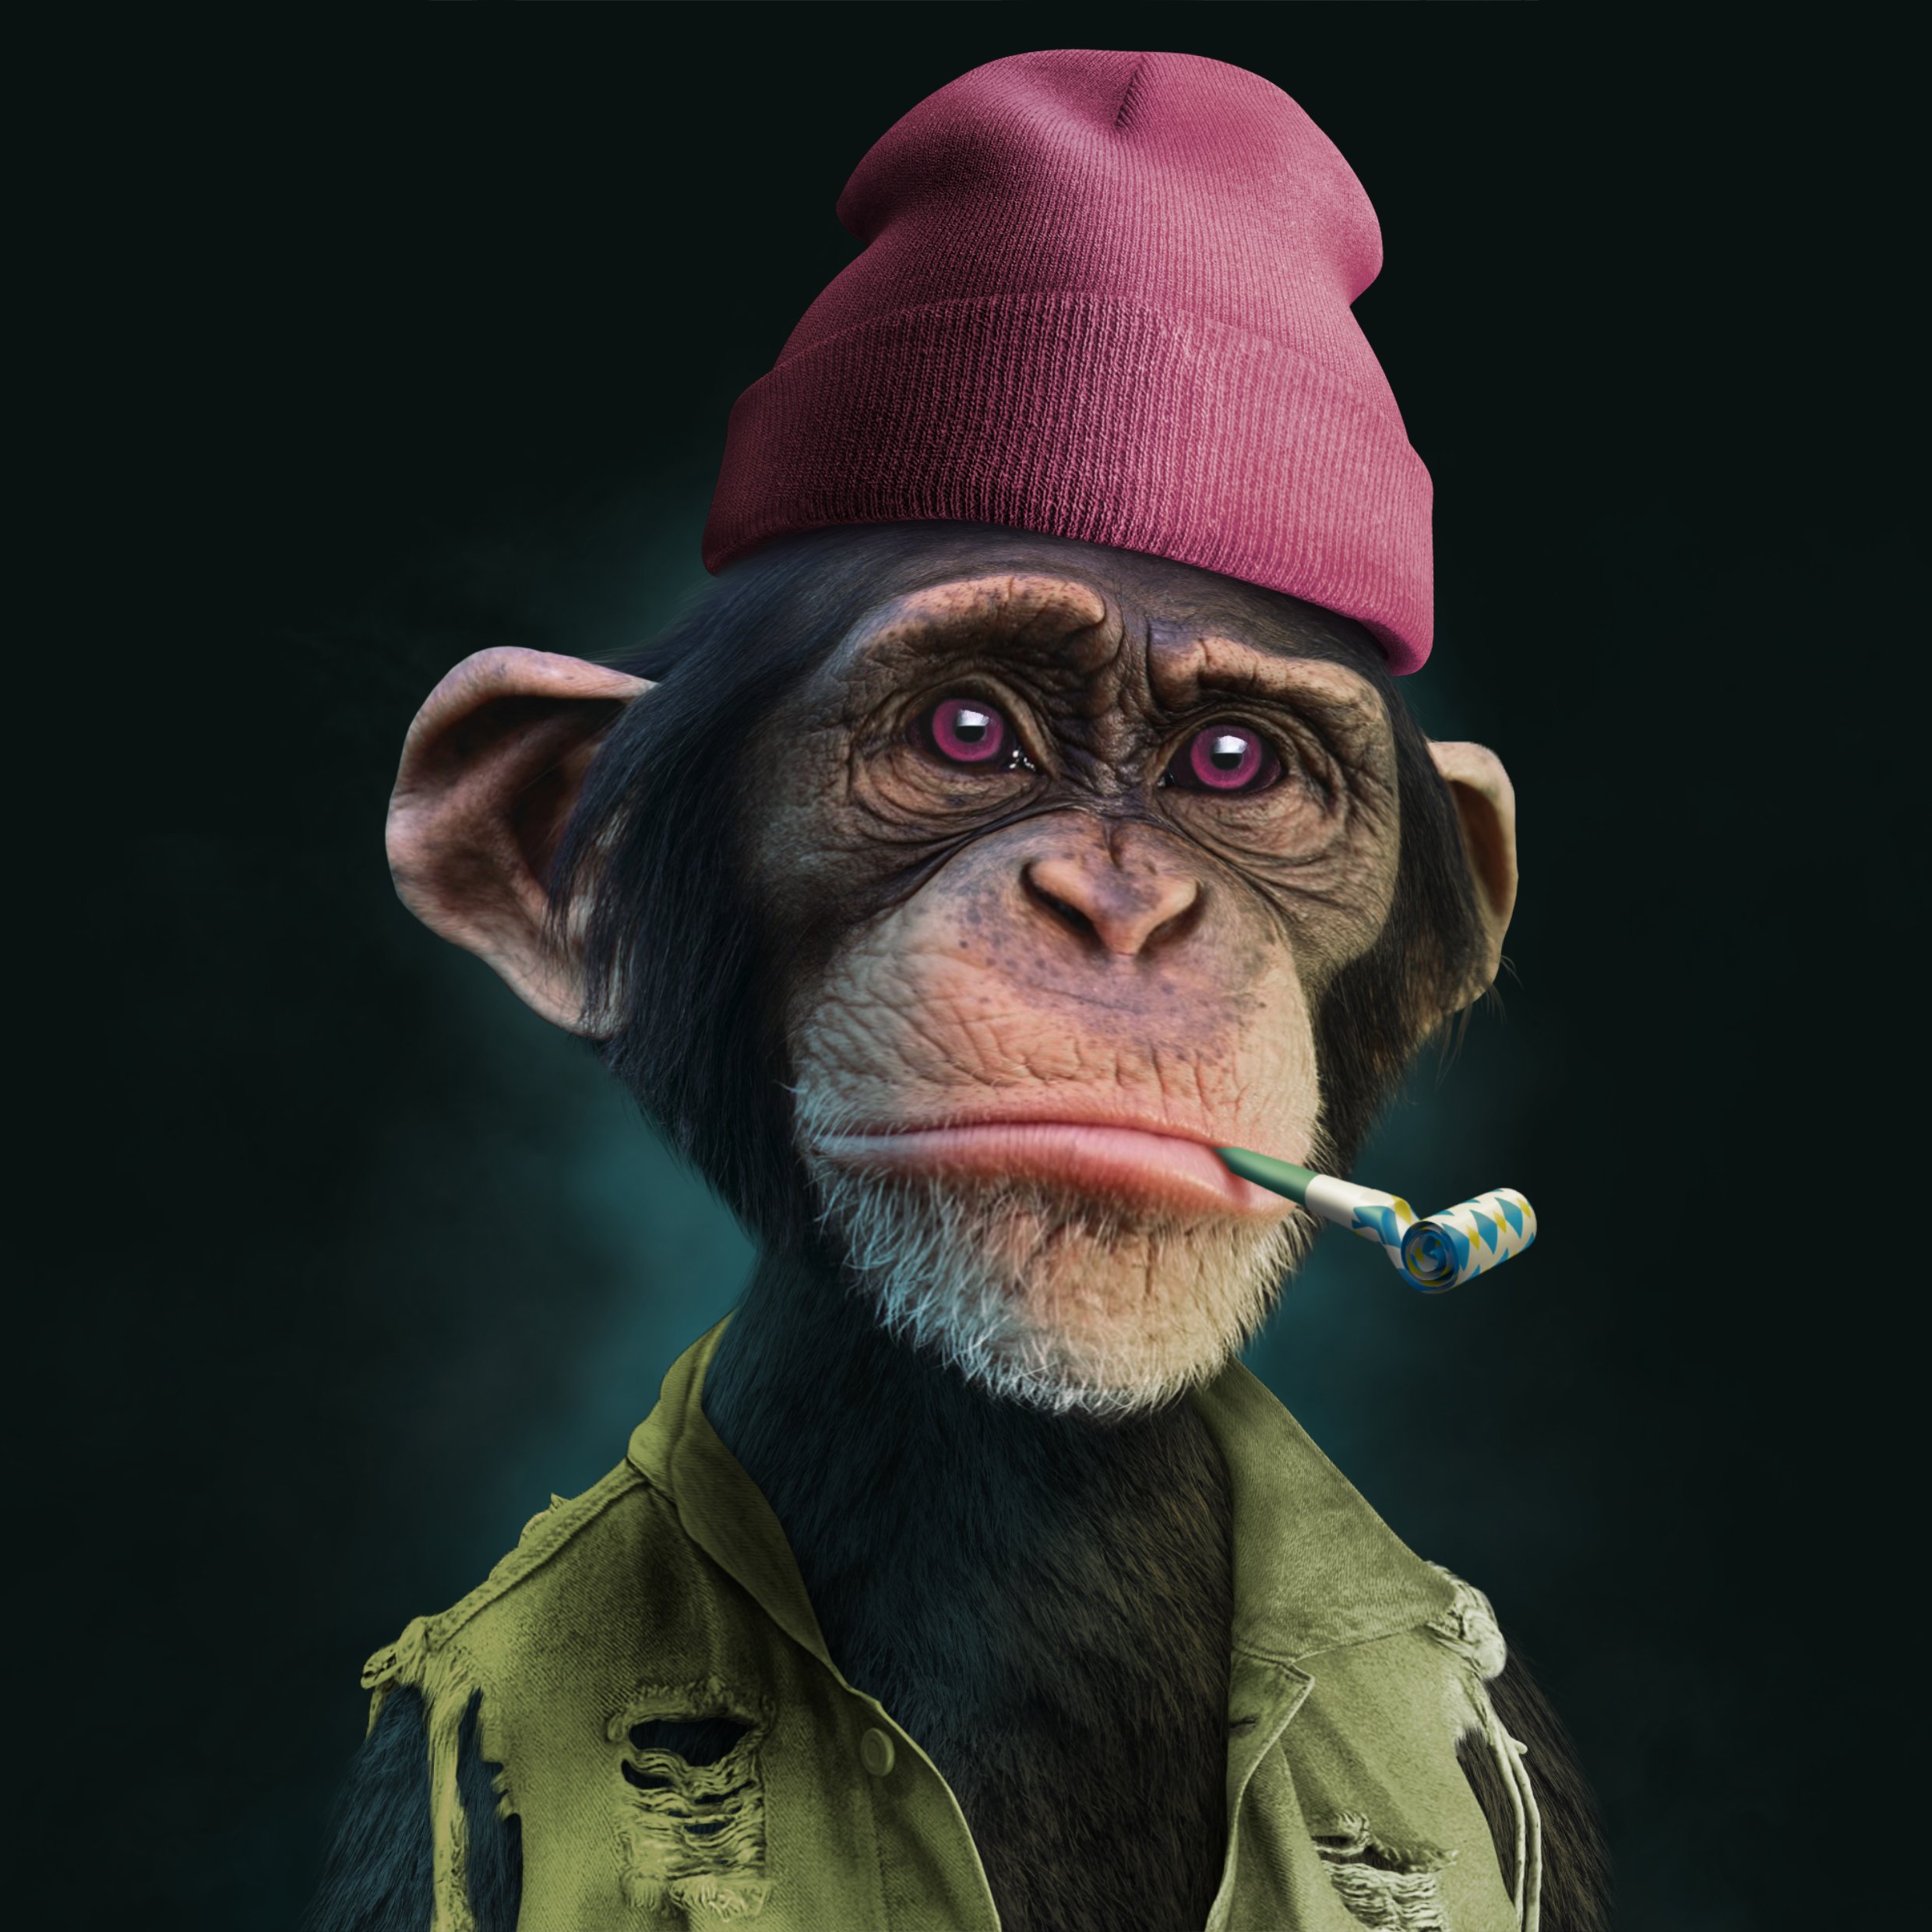 Smoking Monkey In Suit Canvas Painting Posters and Prints Modern Graffiti  Funny Animal Wall Art Picture for Living Room Decor  AliExpress